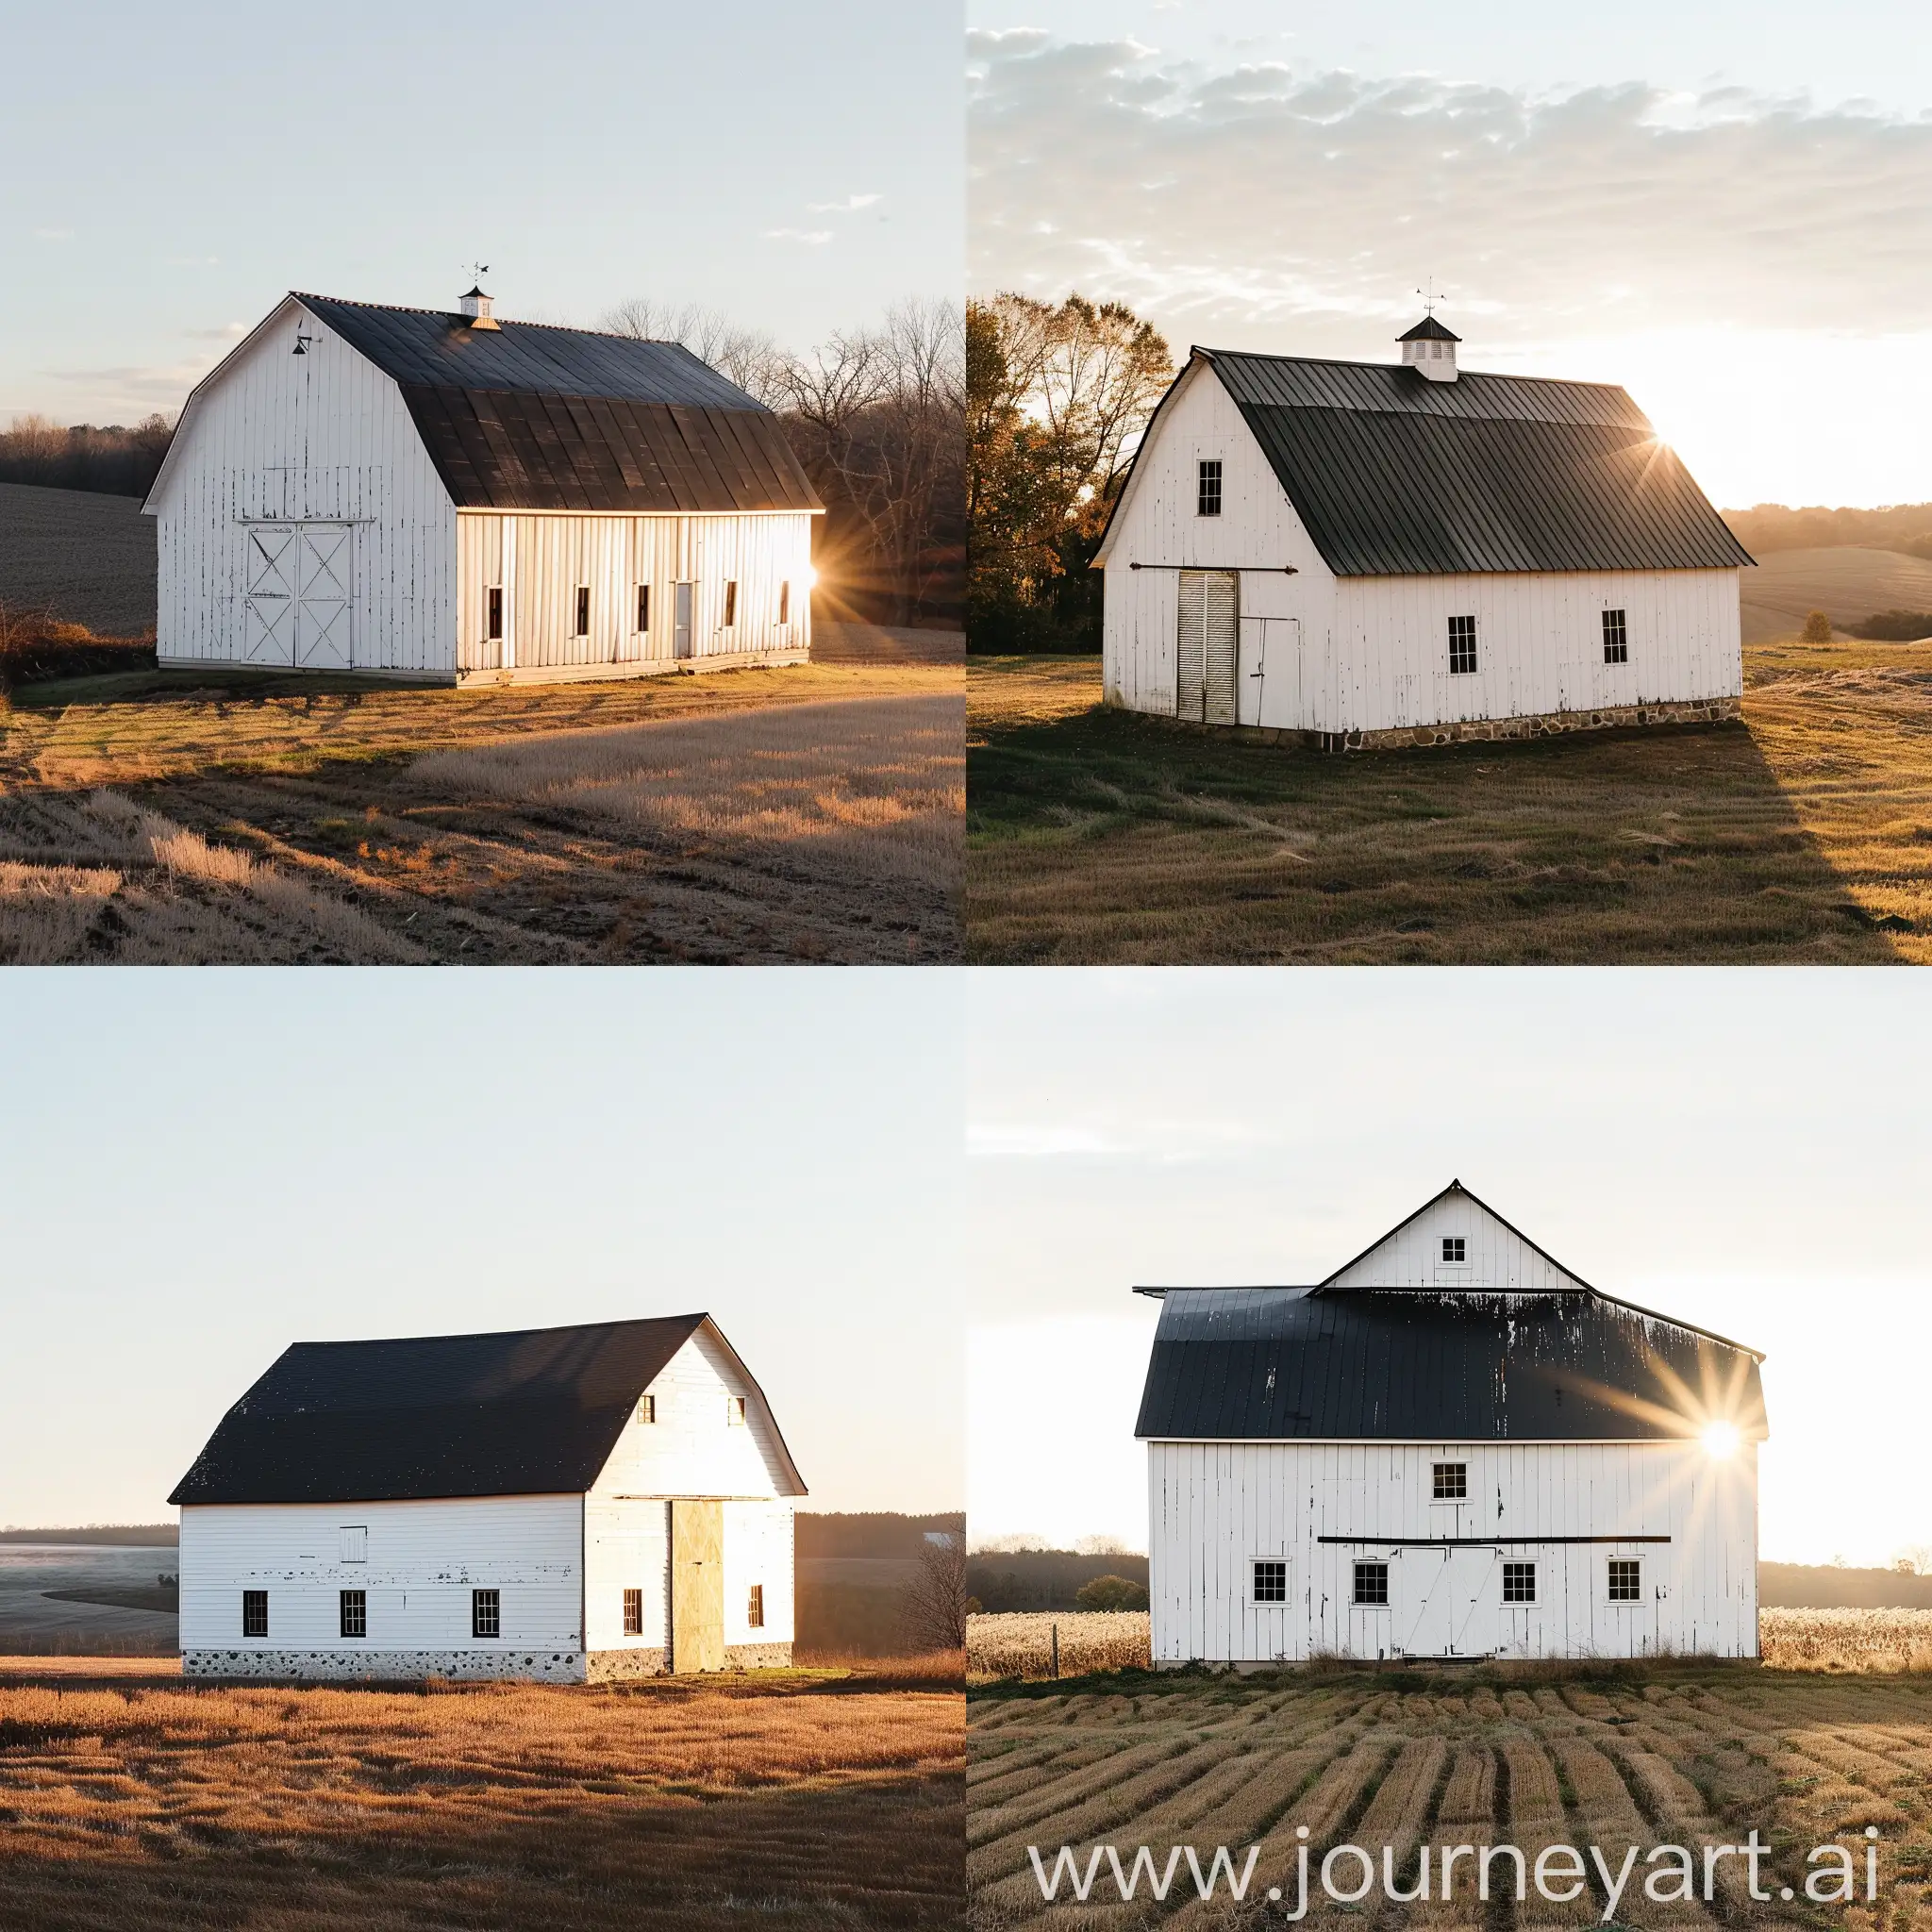 Sunlit-White-Barn-with-Black-Roof-in-Expansive-Field